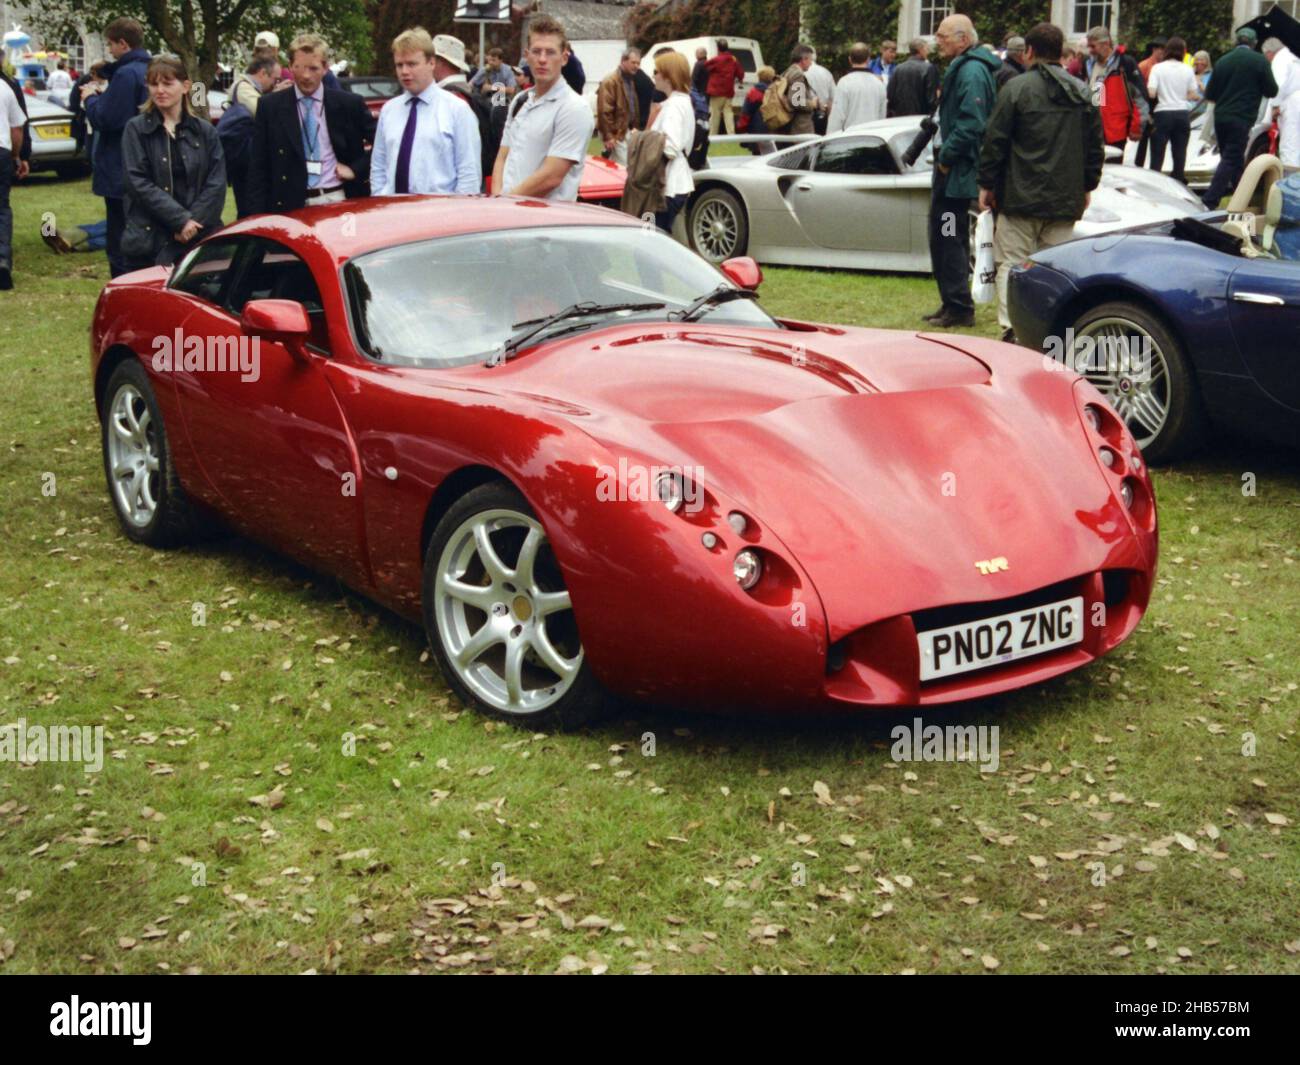 The TVR Engineering Company's Tuscan R, which took part in the supercar run at the Goodwood Festival of Speed, July 2002. Stock Photo